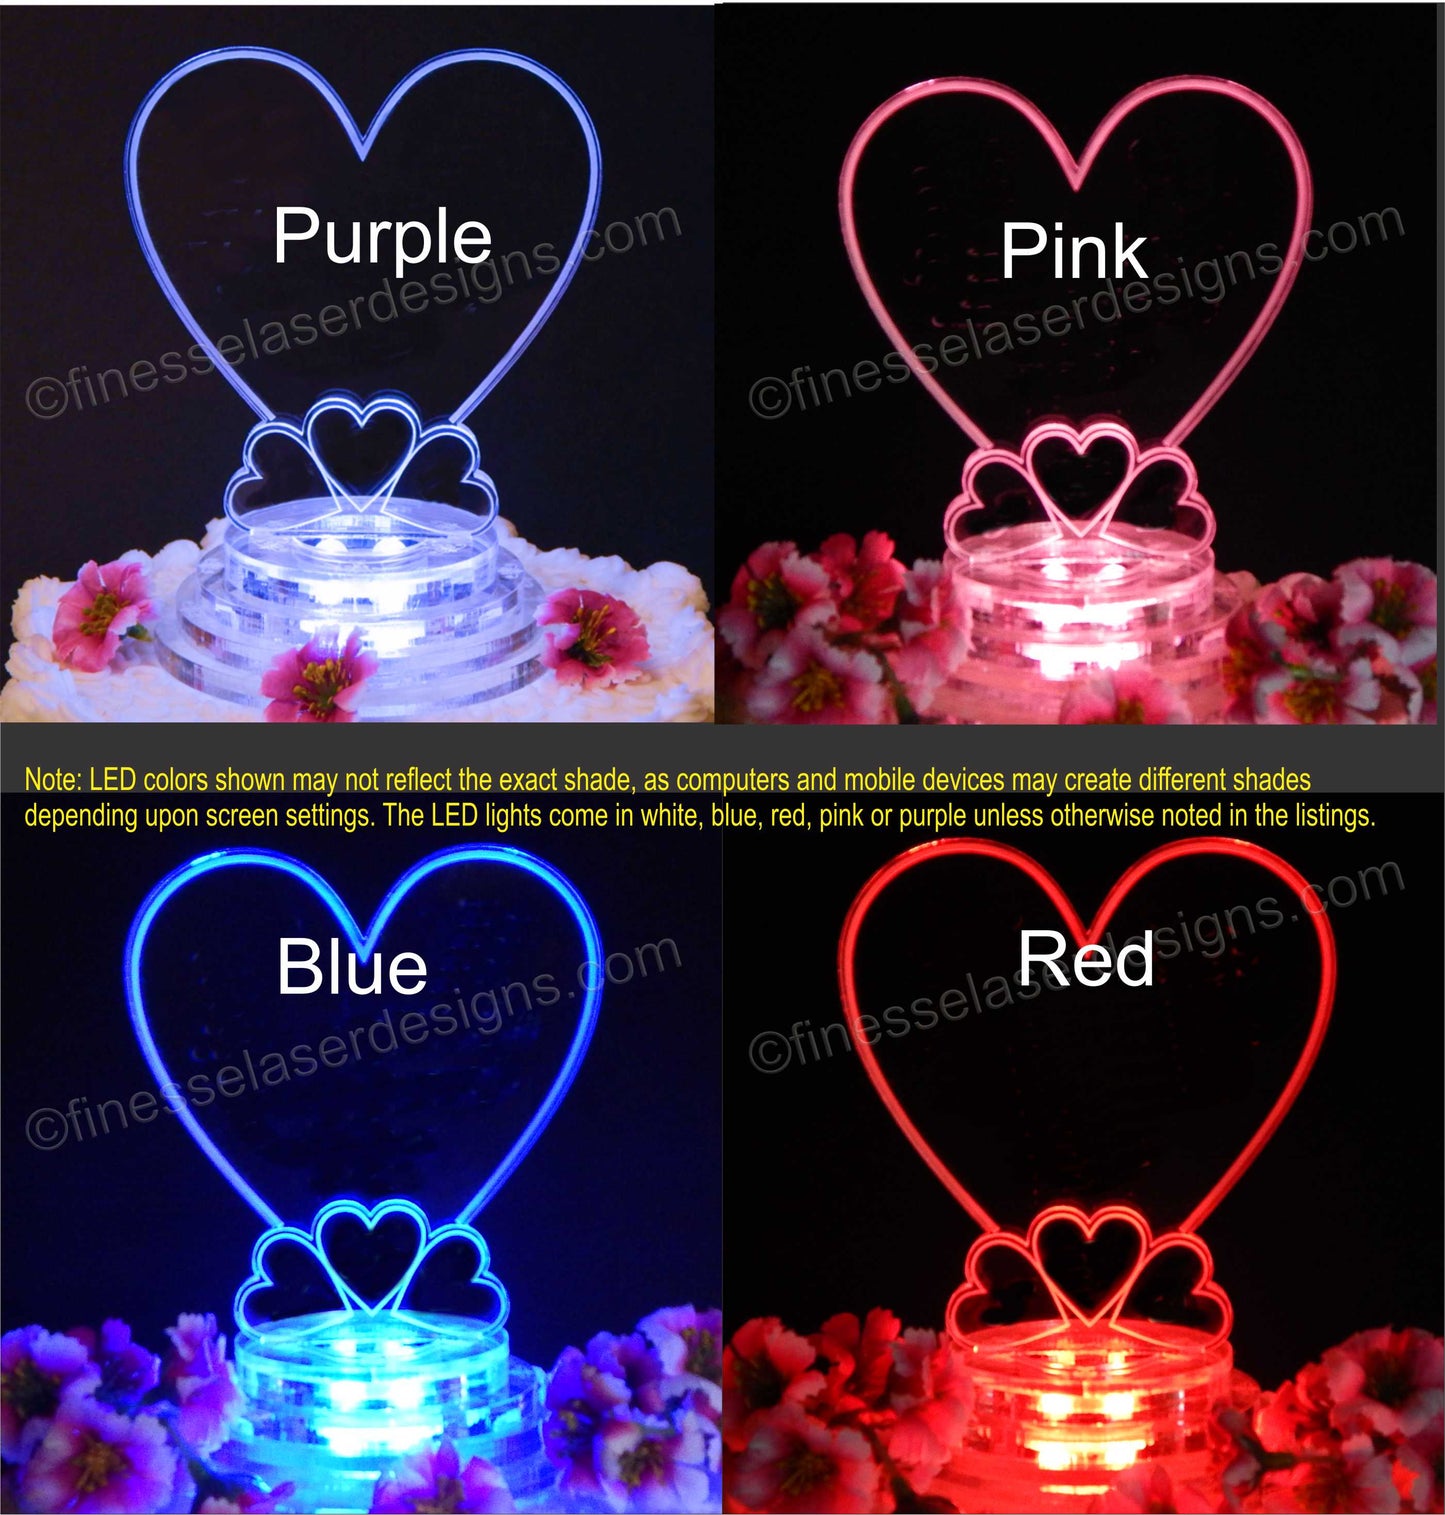 Personalized Monogram Heart Lighted Acrylic LED Anniversary Cake Topper